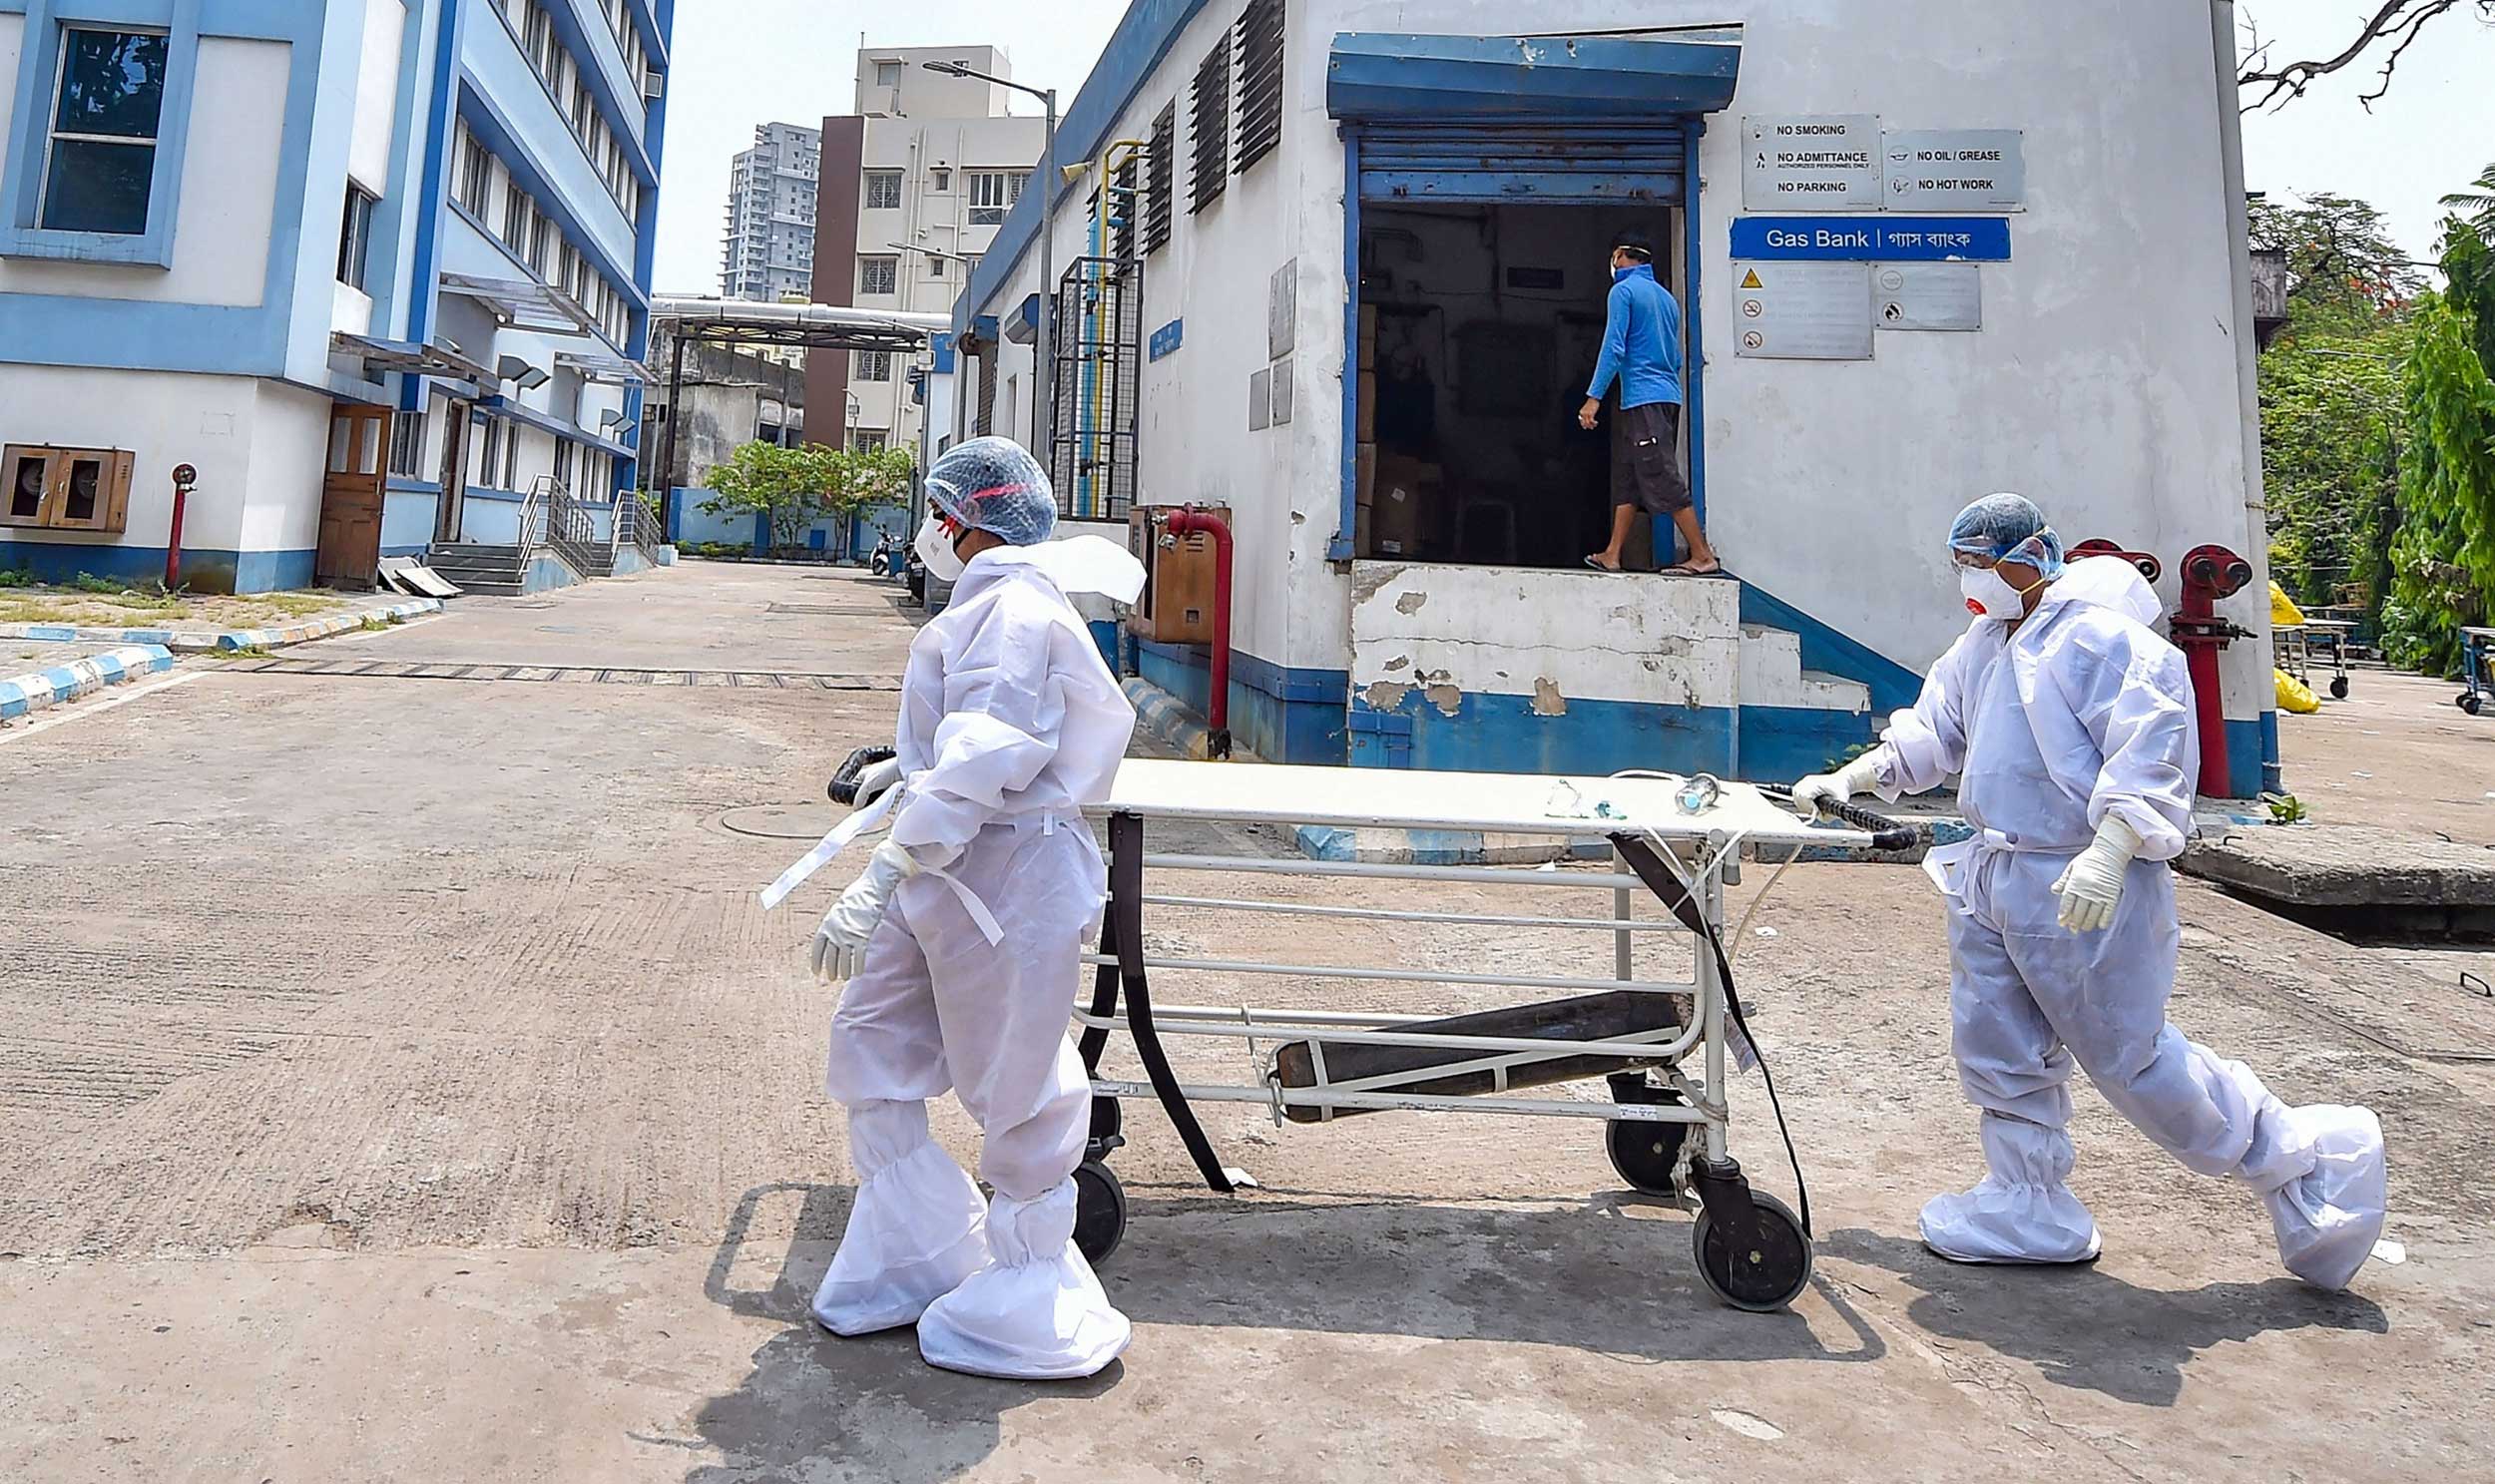 Medical workers wearing protective suits carry a stretcher for a Covid-19 patient at a Calcutta hospital on Monday.